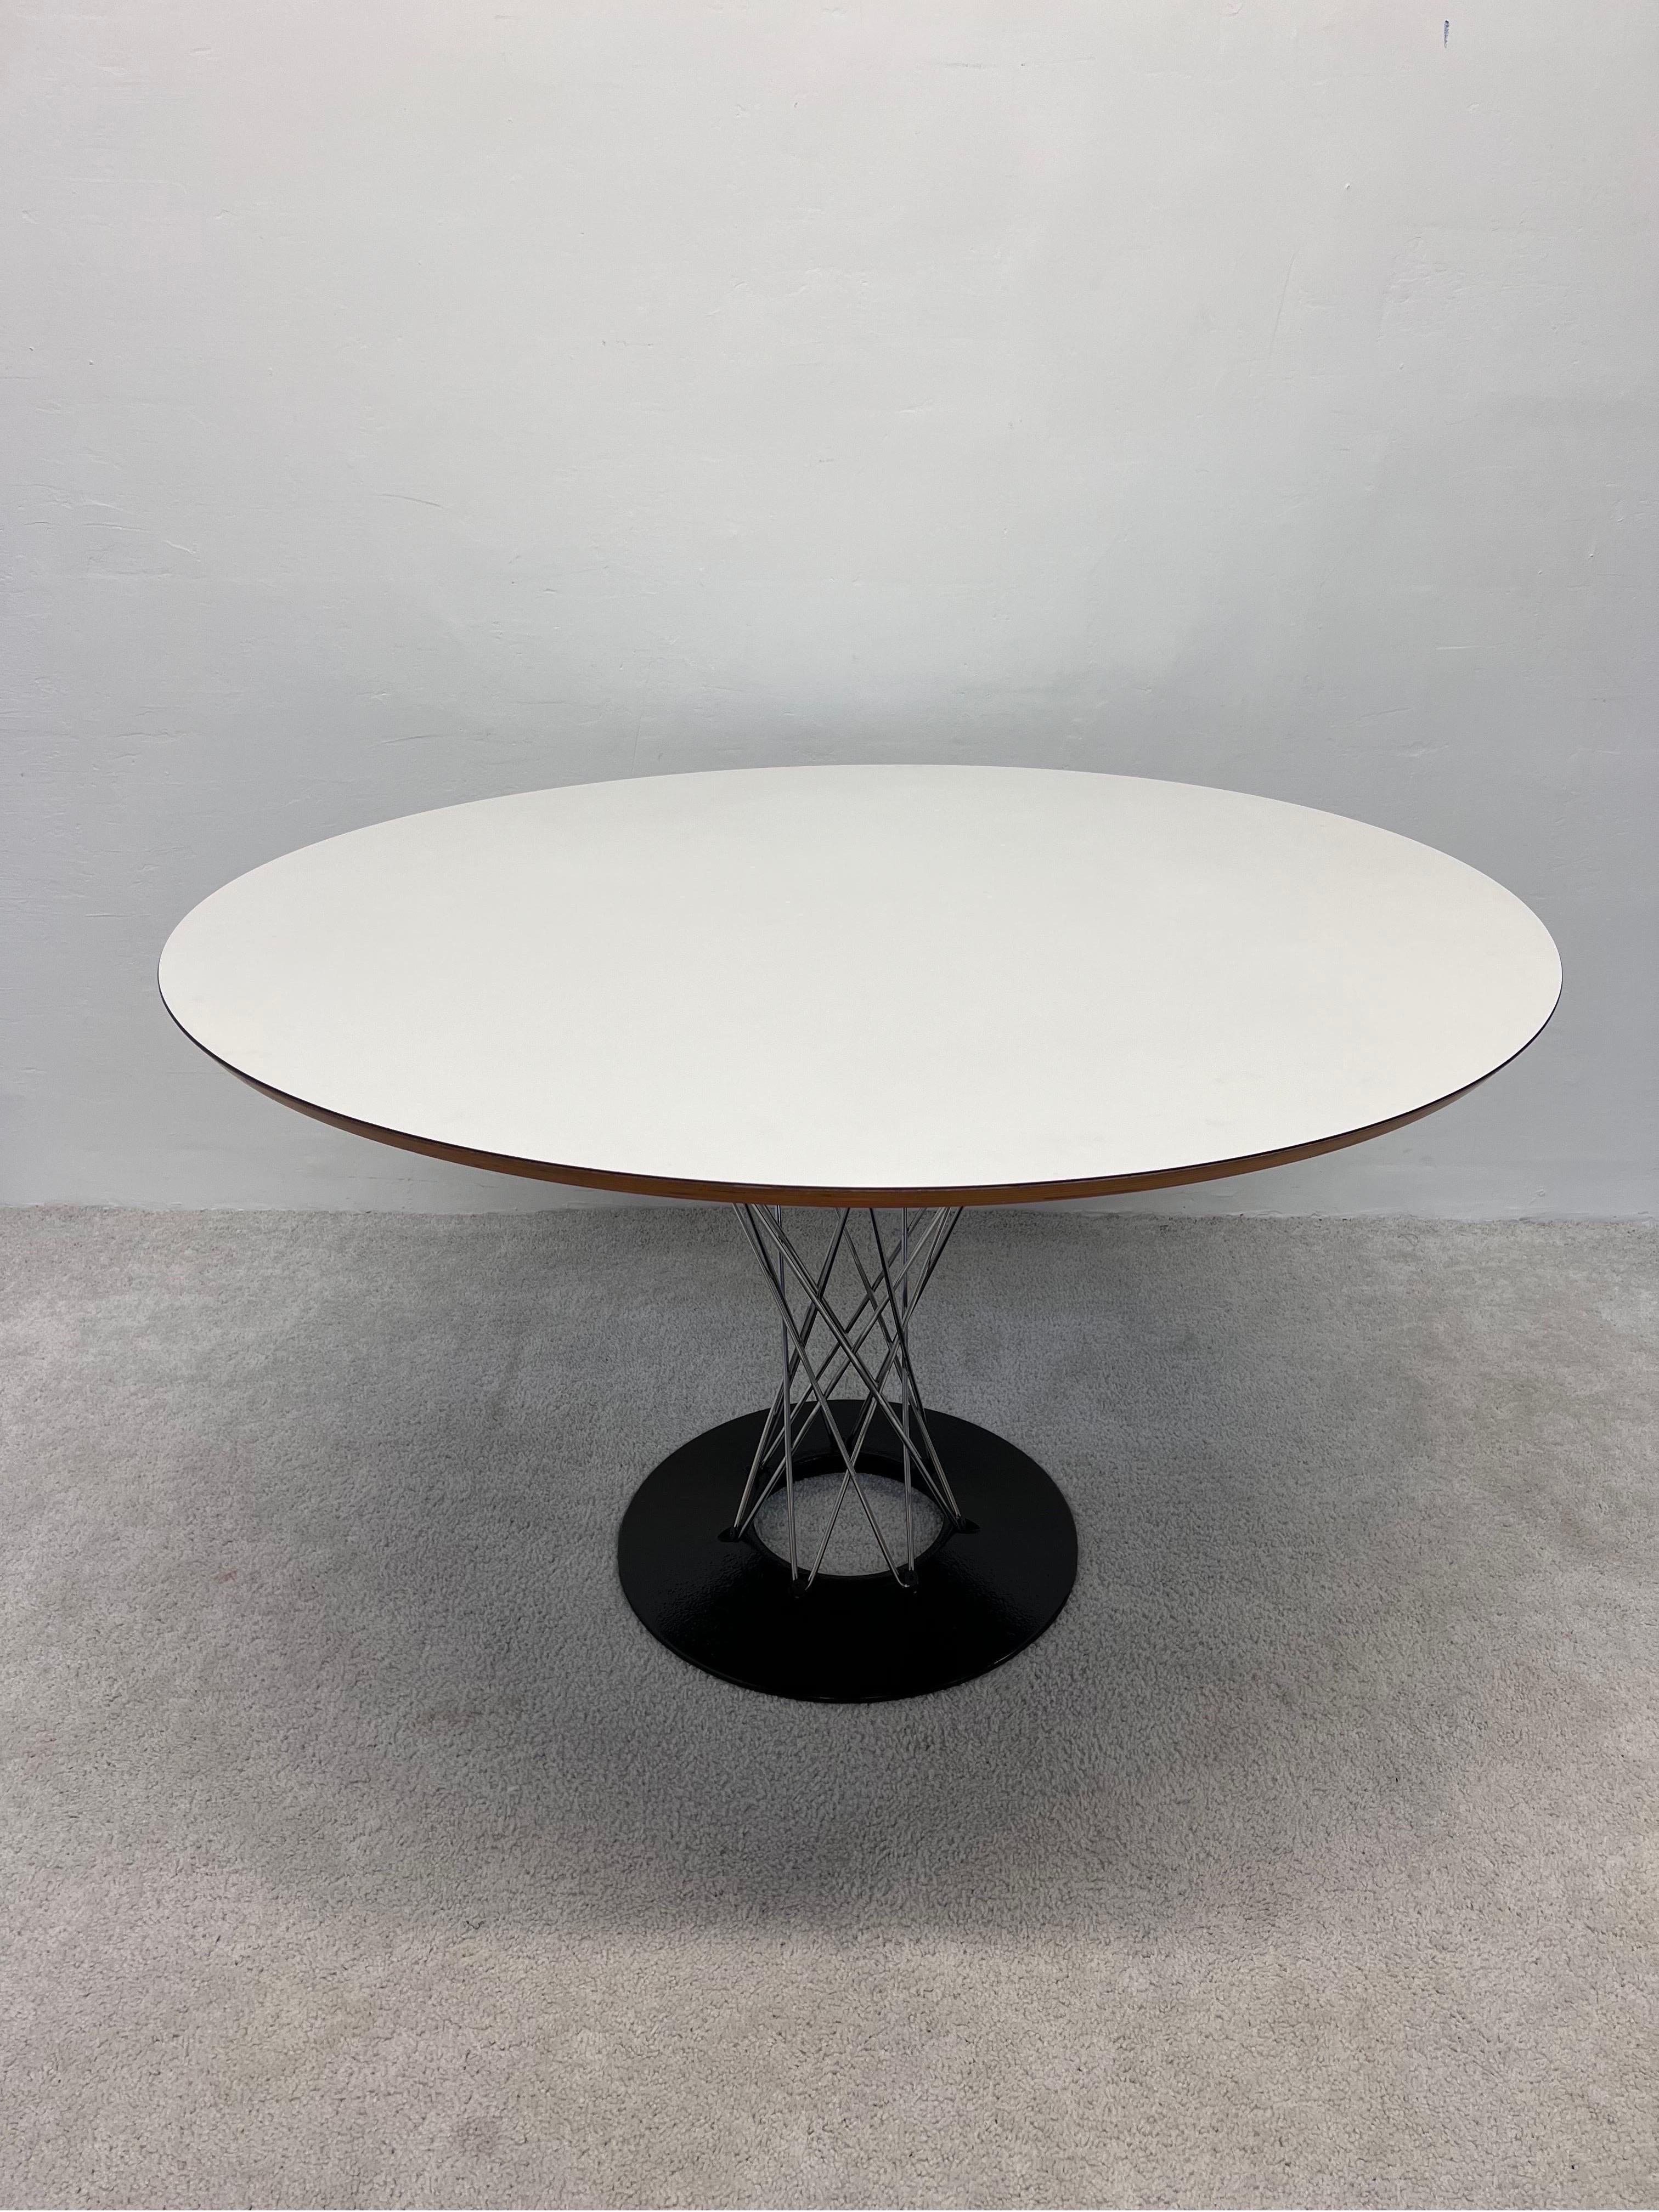 Mid-Century Modern Isamu Noguchi Cyclone Dining Table with White Laminate Top for Knoll, 1971